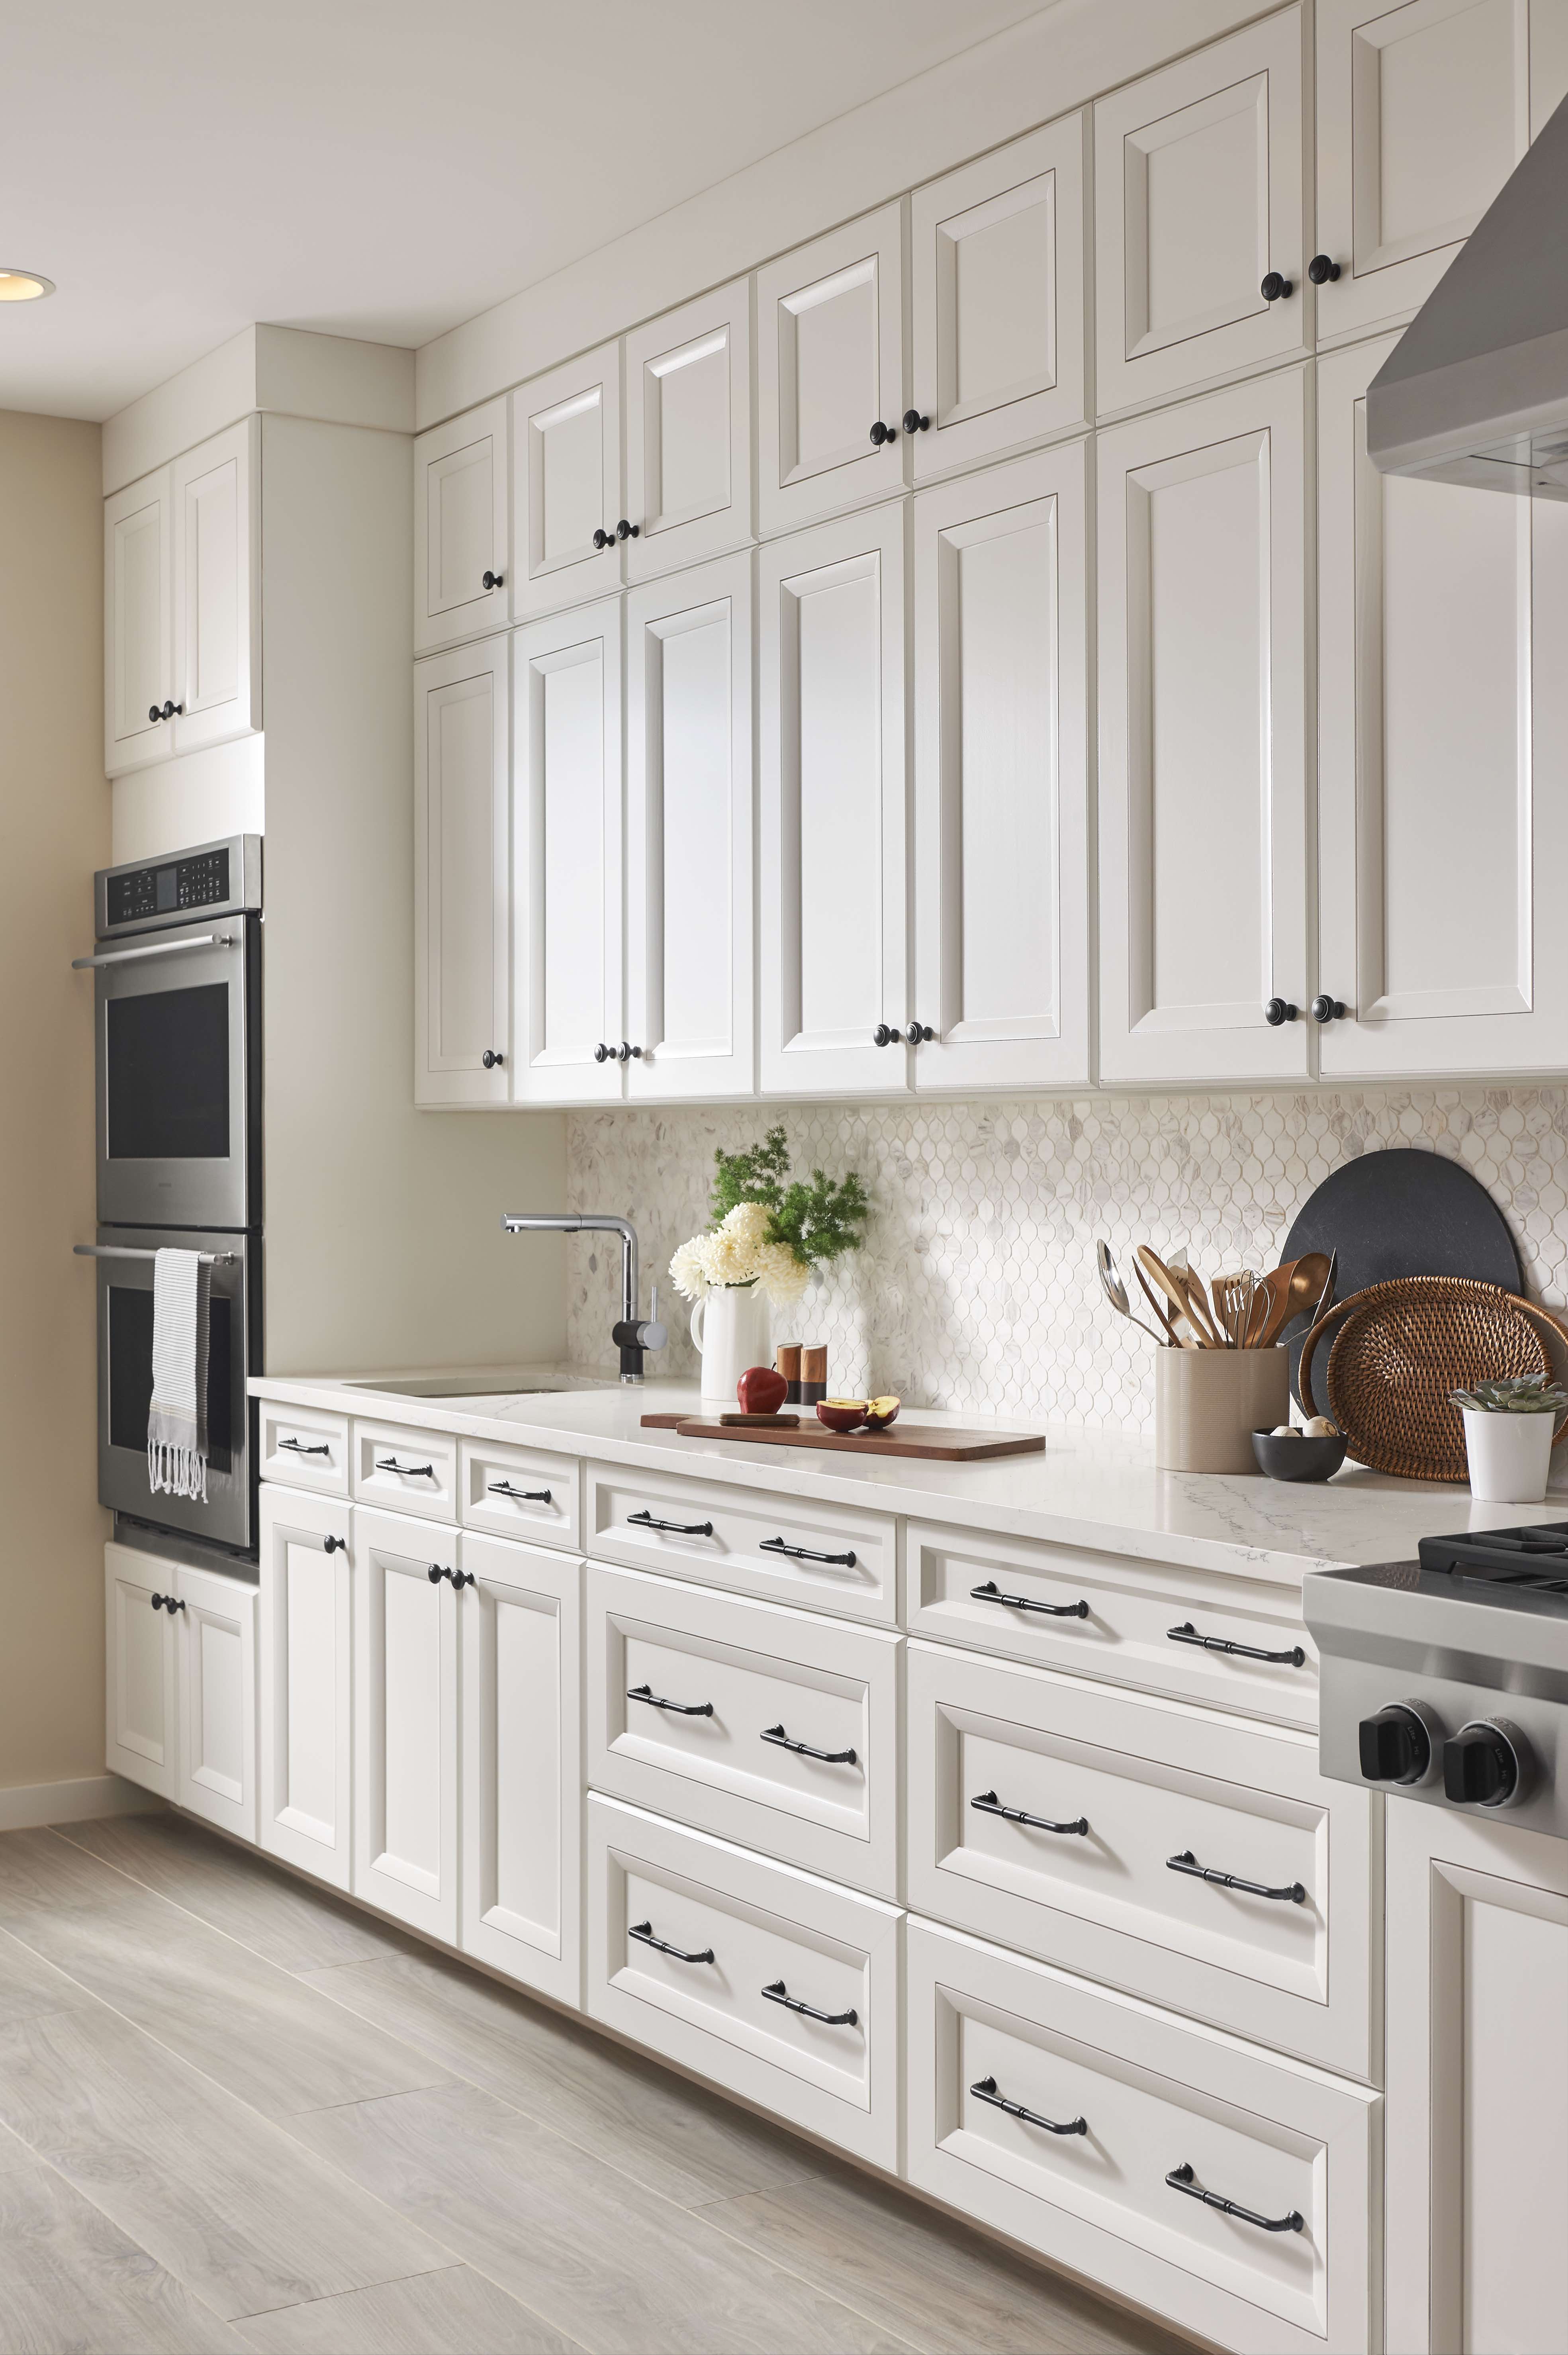 The Grace Collection, inspired by manufacturer Top Knobs’ most successful designs over the past 25 years, consists of 276 pieces, including appliance pulls, knobs, and door pulls, in six series: Kent (shown), Barrow, Henderson, Minetta, Pomander, and Riverside. All hardware is available in six finishes: Ash Gray, Brushed Satin Nickel, Flat Black, Honey Bronze, Polished Chrome, and Polished Nickel. 